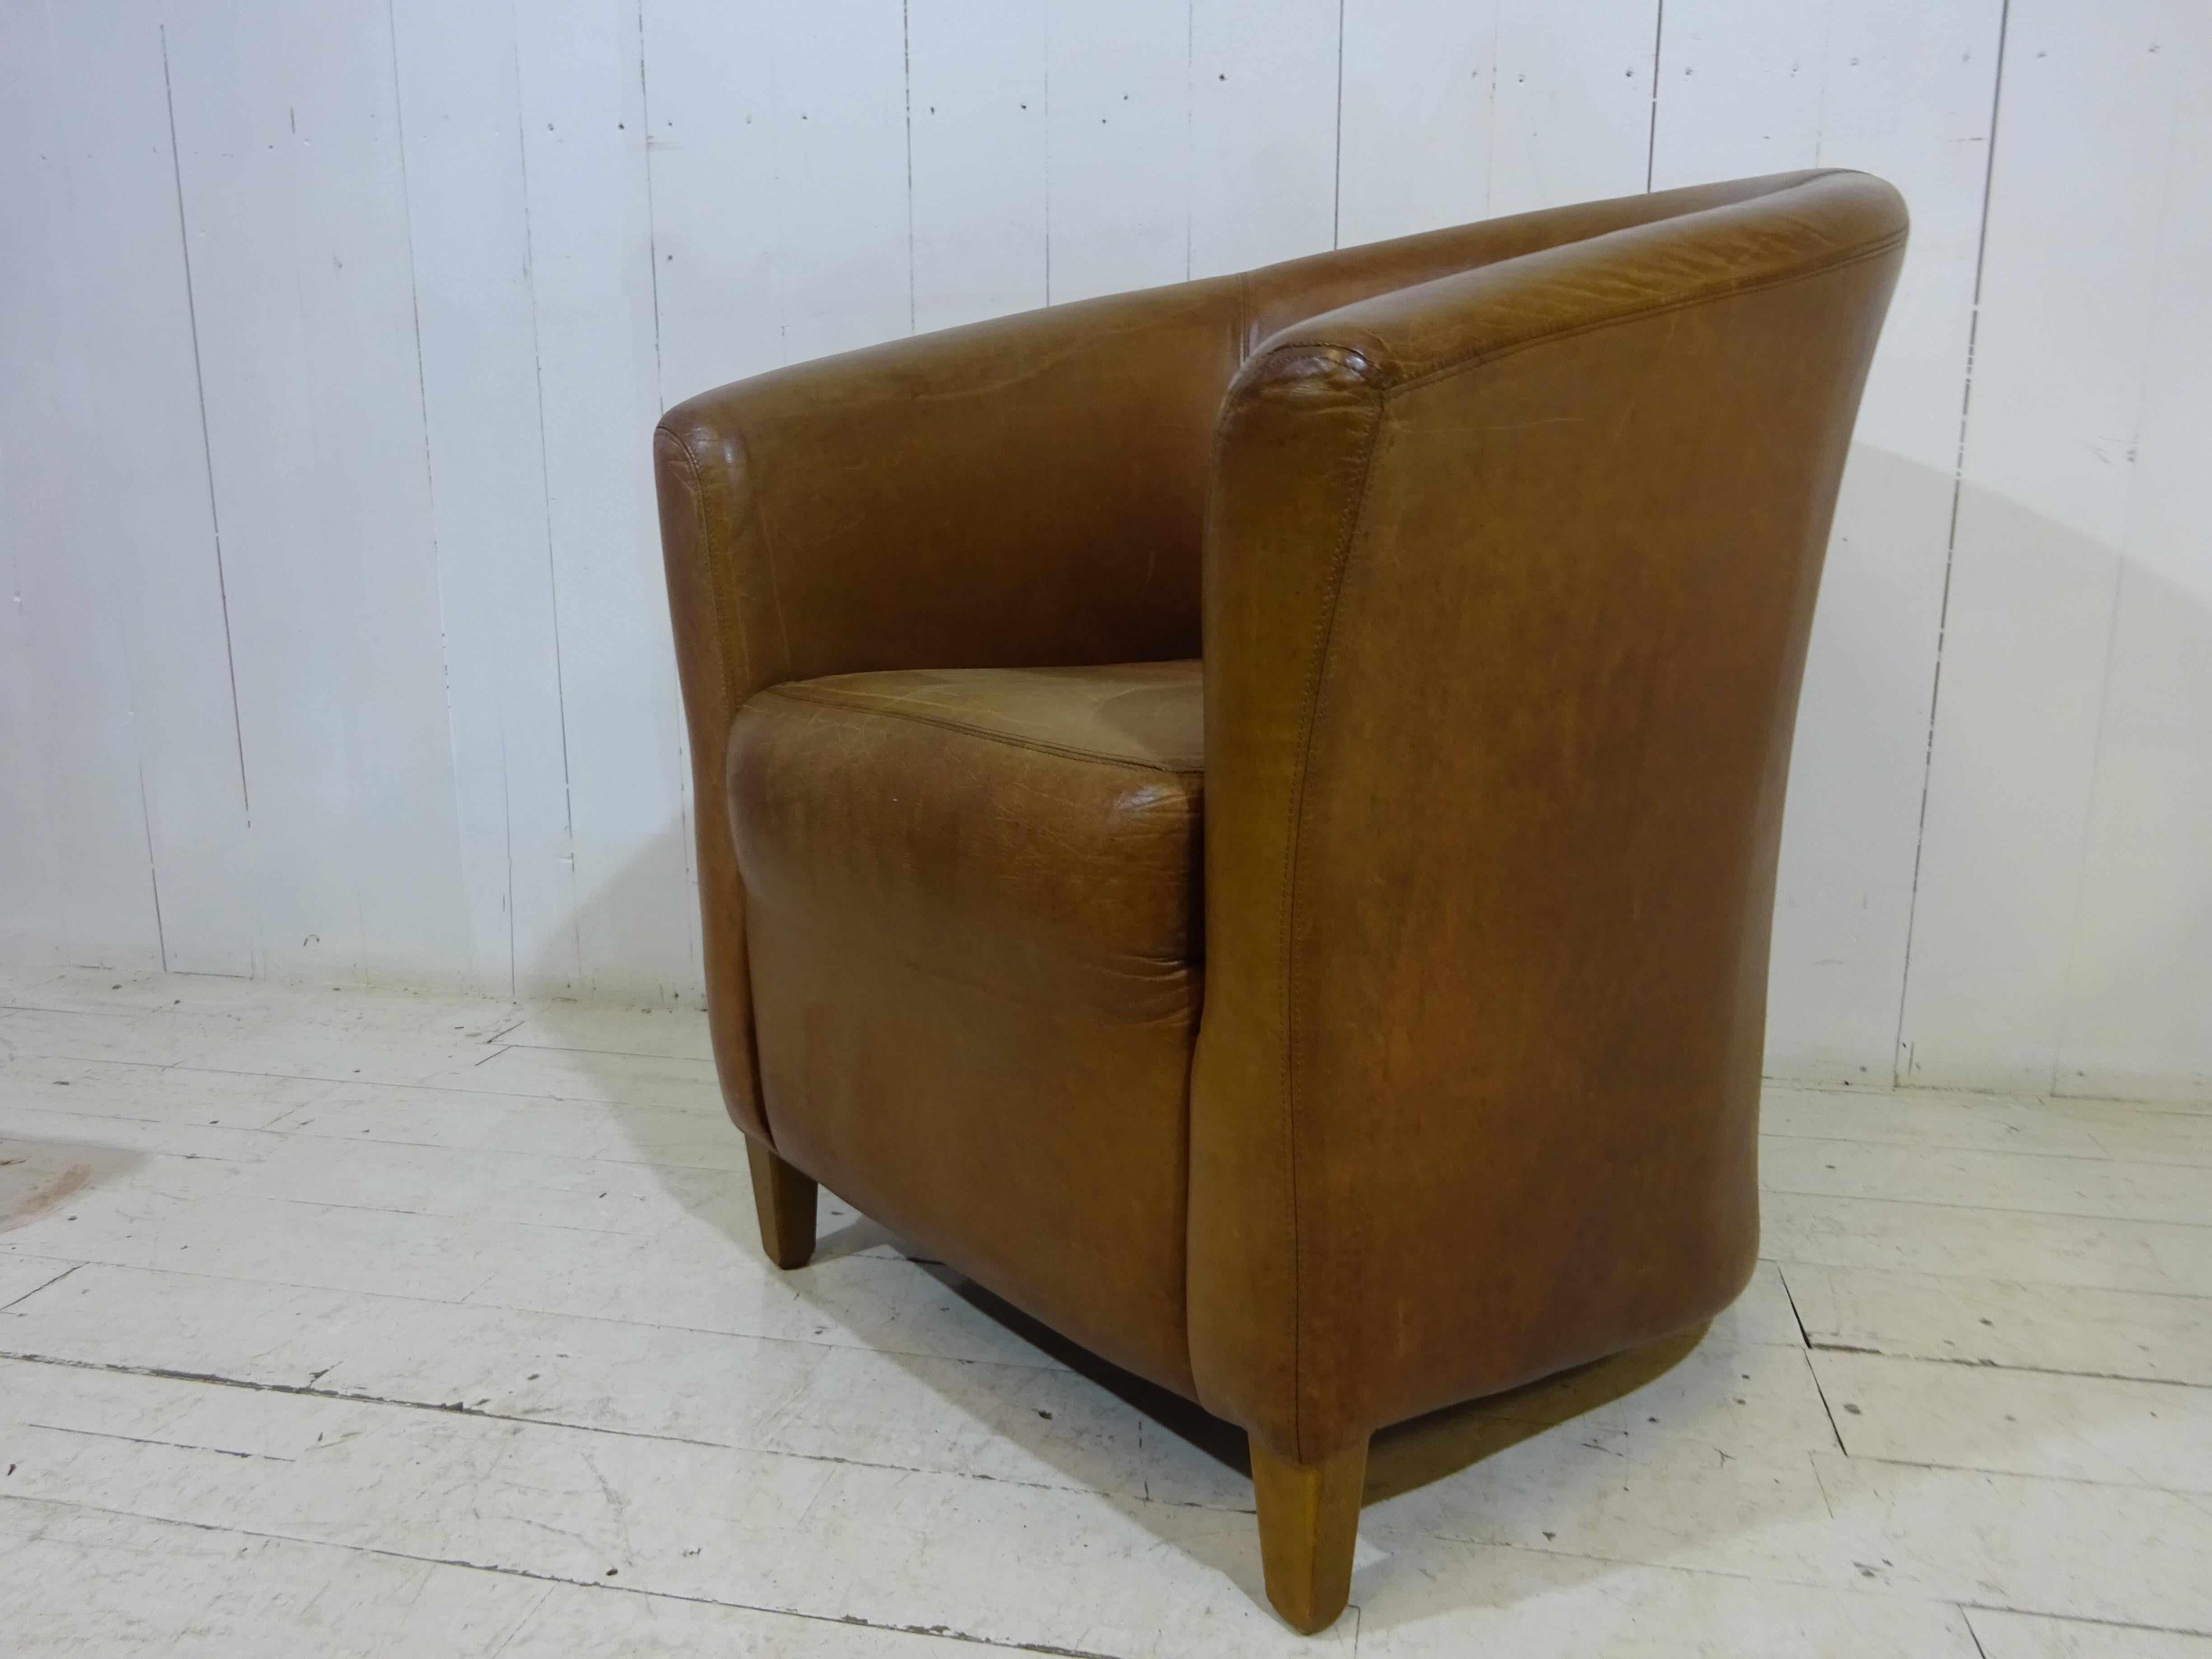 Modern Retro Hotel Tub Chair in Distressed Tan Leather